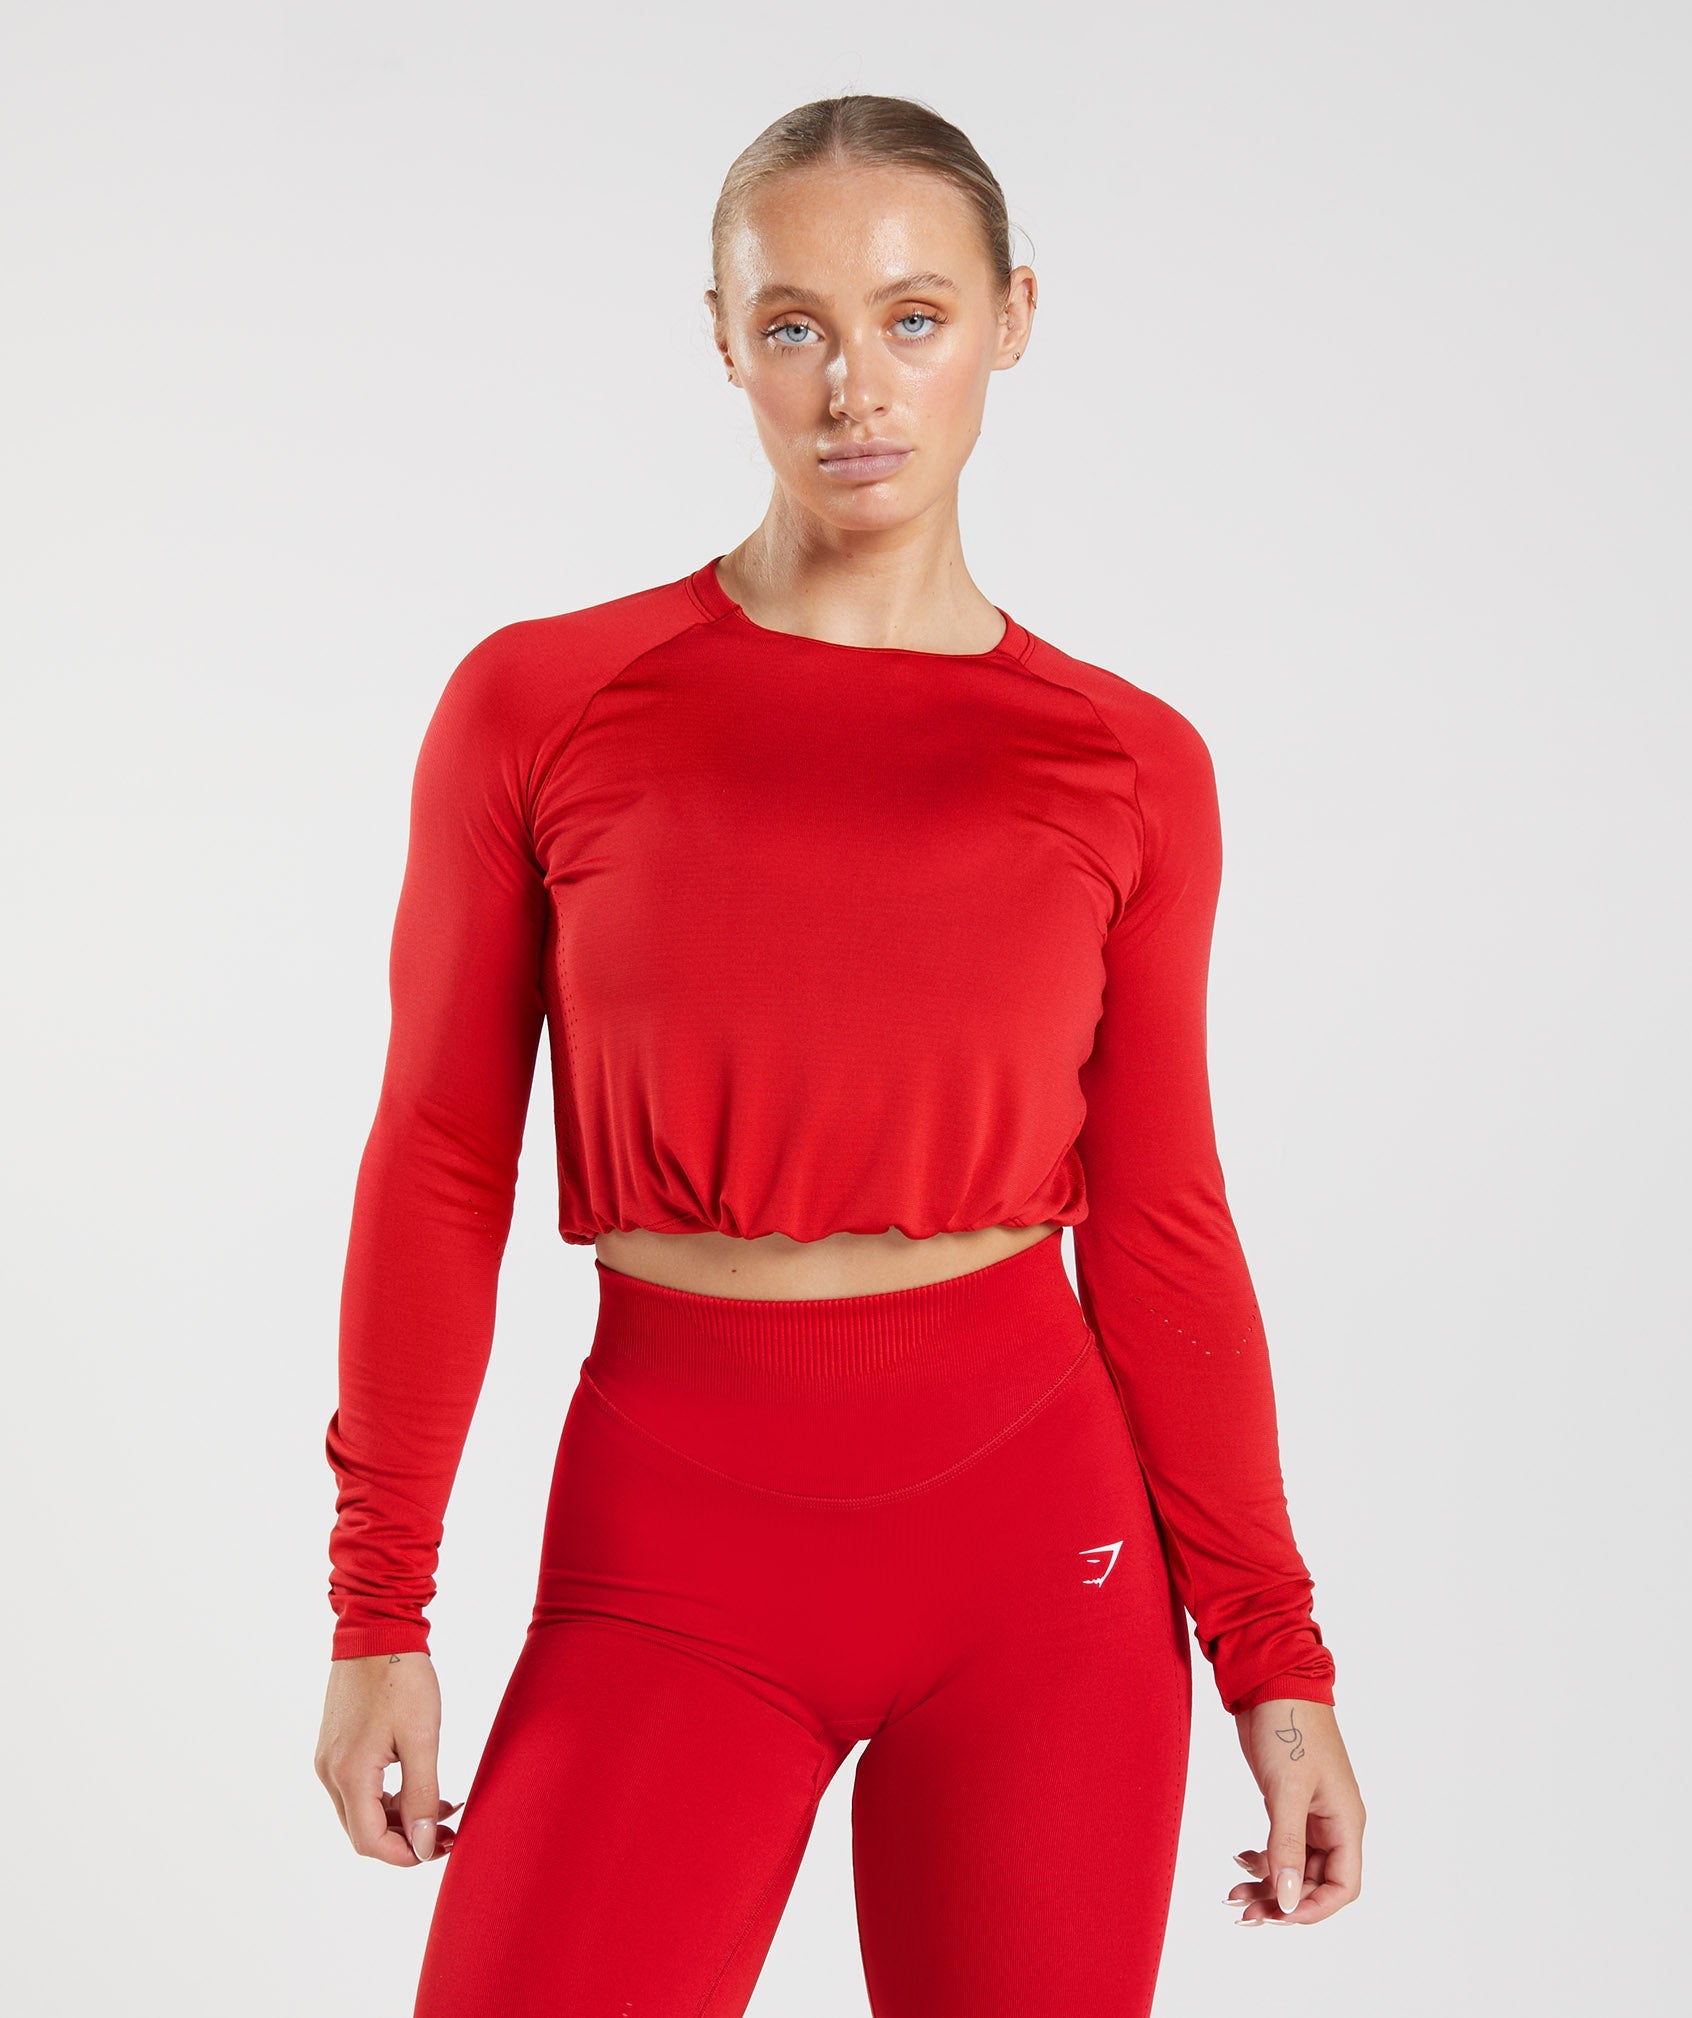  Workout Shirts For Women Long Sleeve, Workout Tops For Women,  Quick Dry Gym Athletic TopsSeamless Yoga Compression Shirts Dark Red